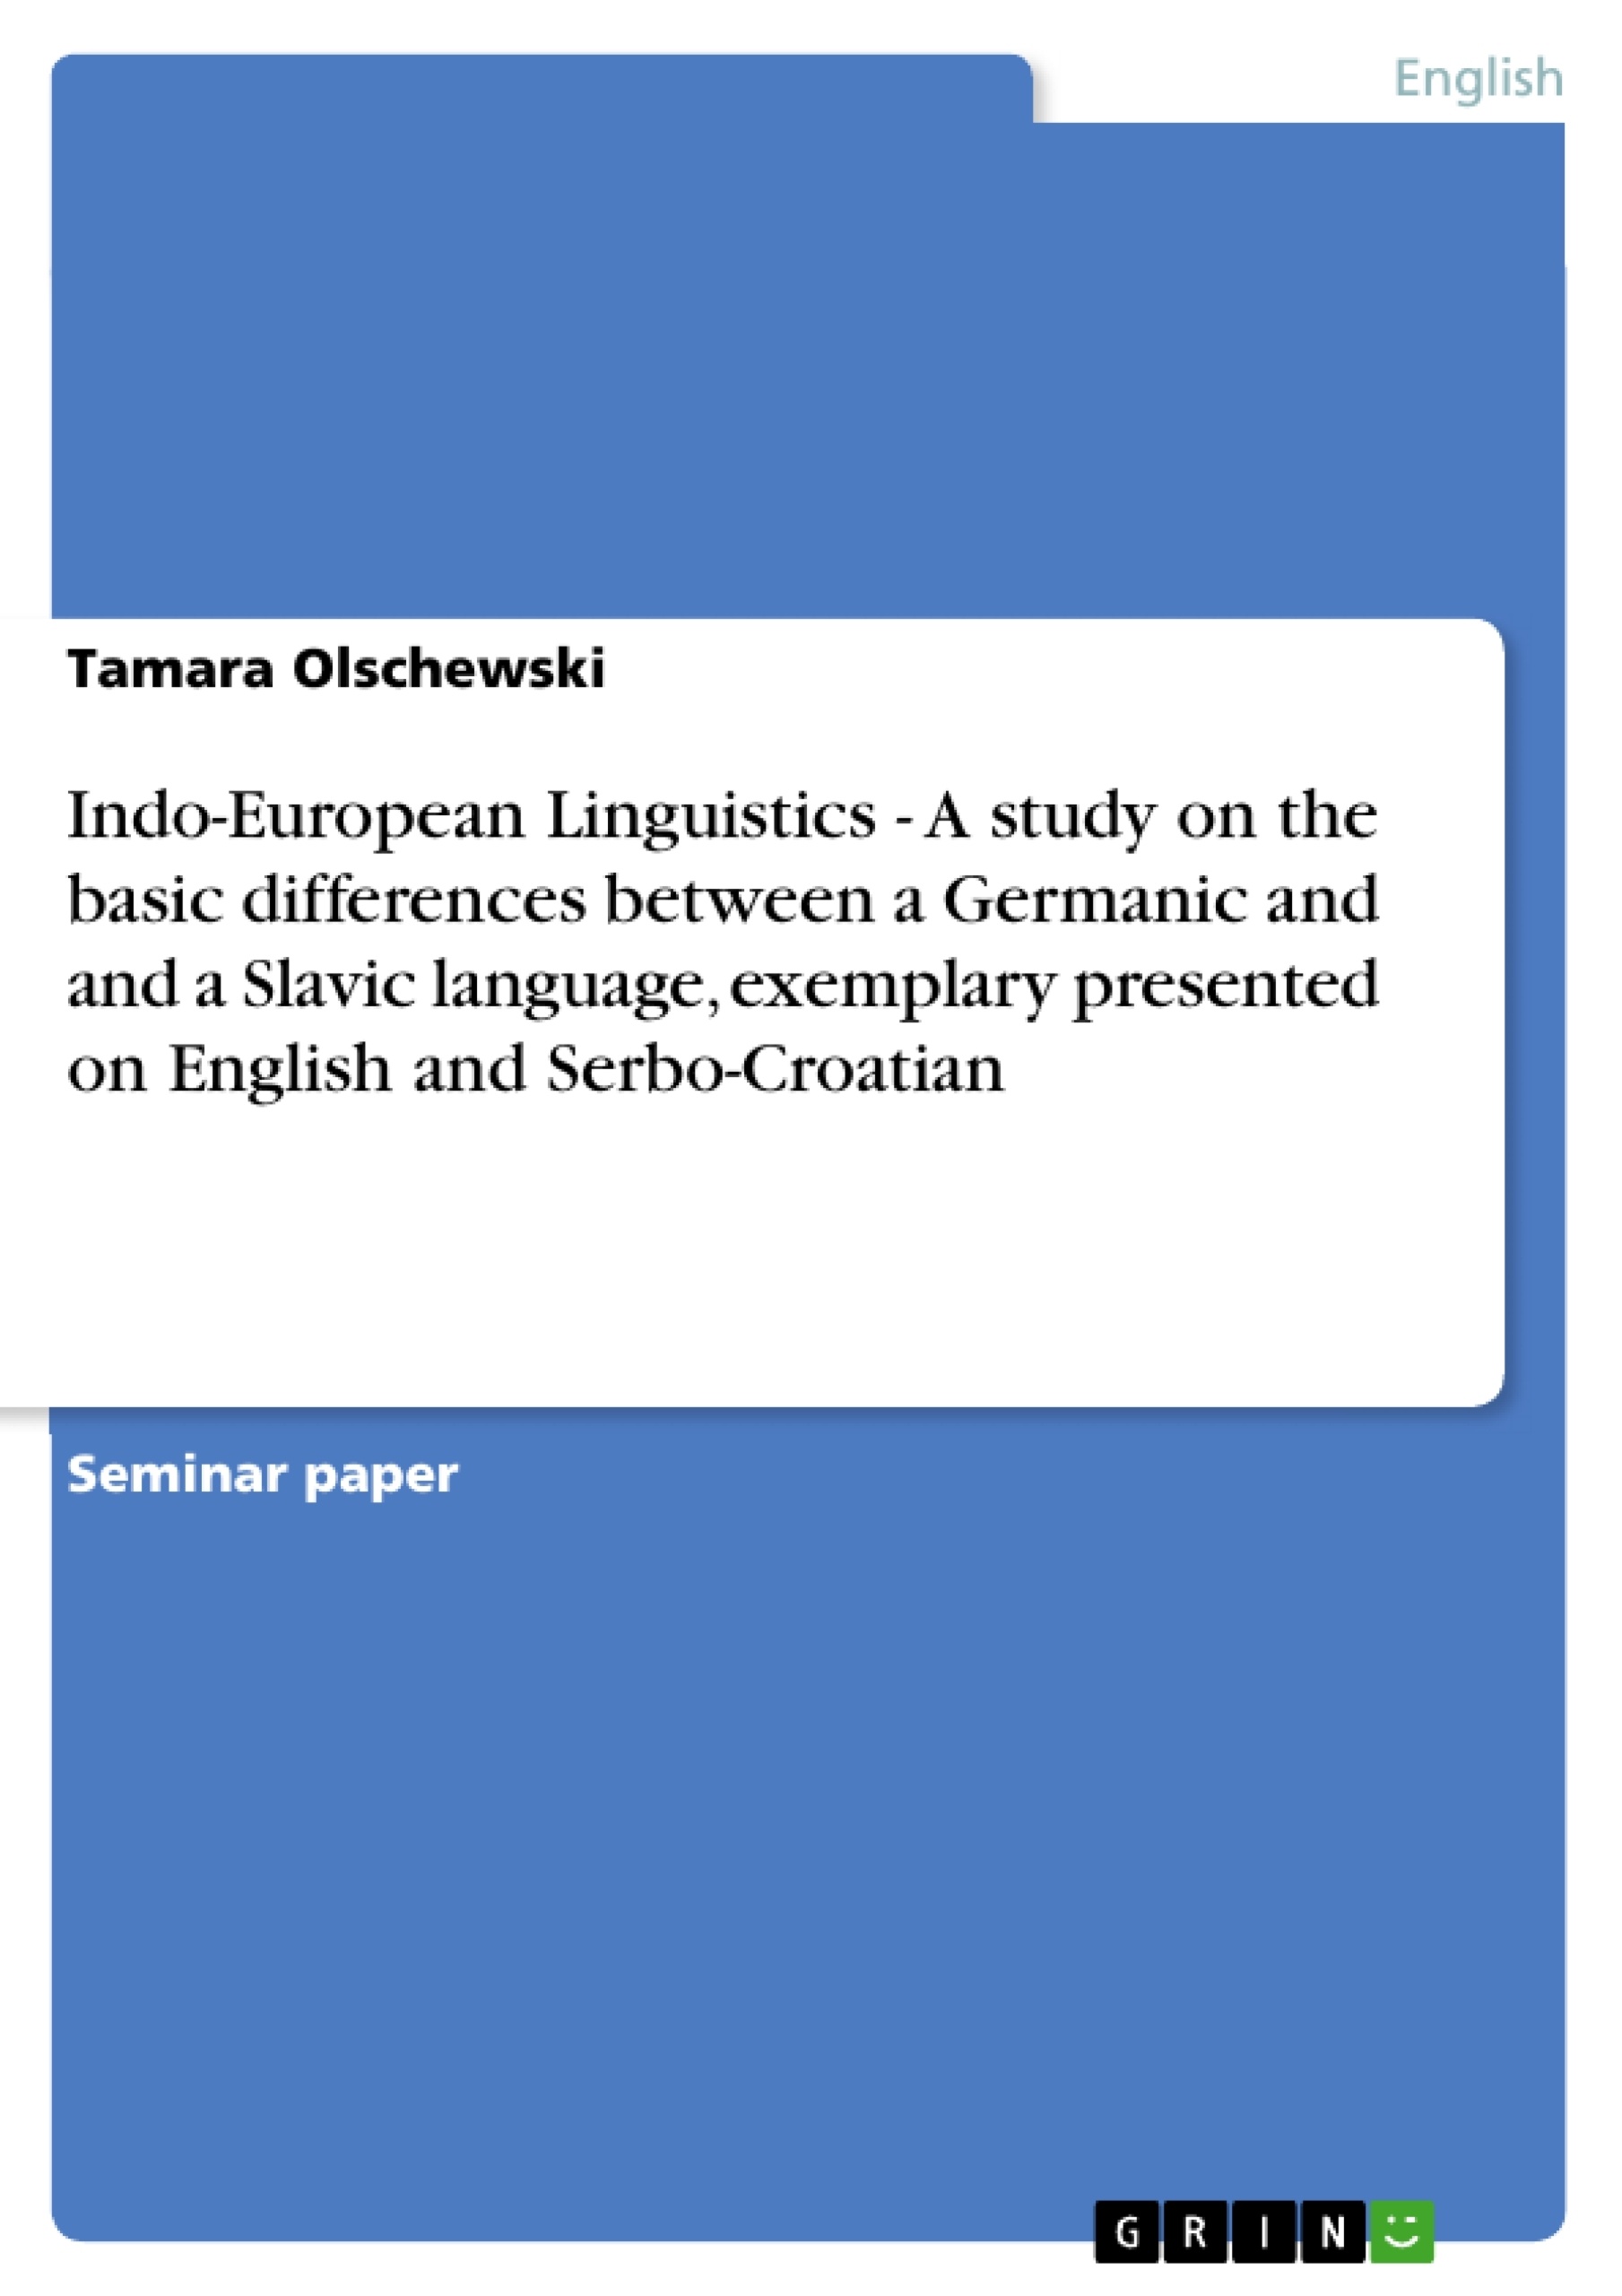 Title: Indo-European Linguistics - A study on the basic differences between a Germanic and and a Slavic language, exemplary presented on English and Serbo-Croatian